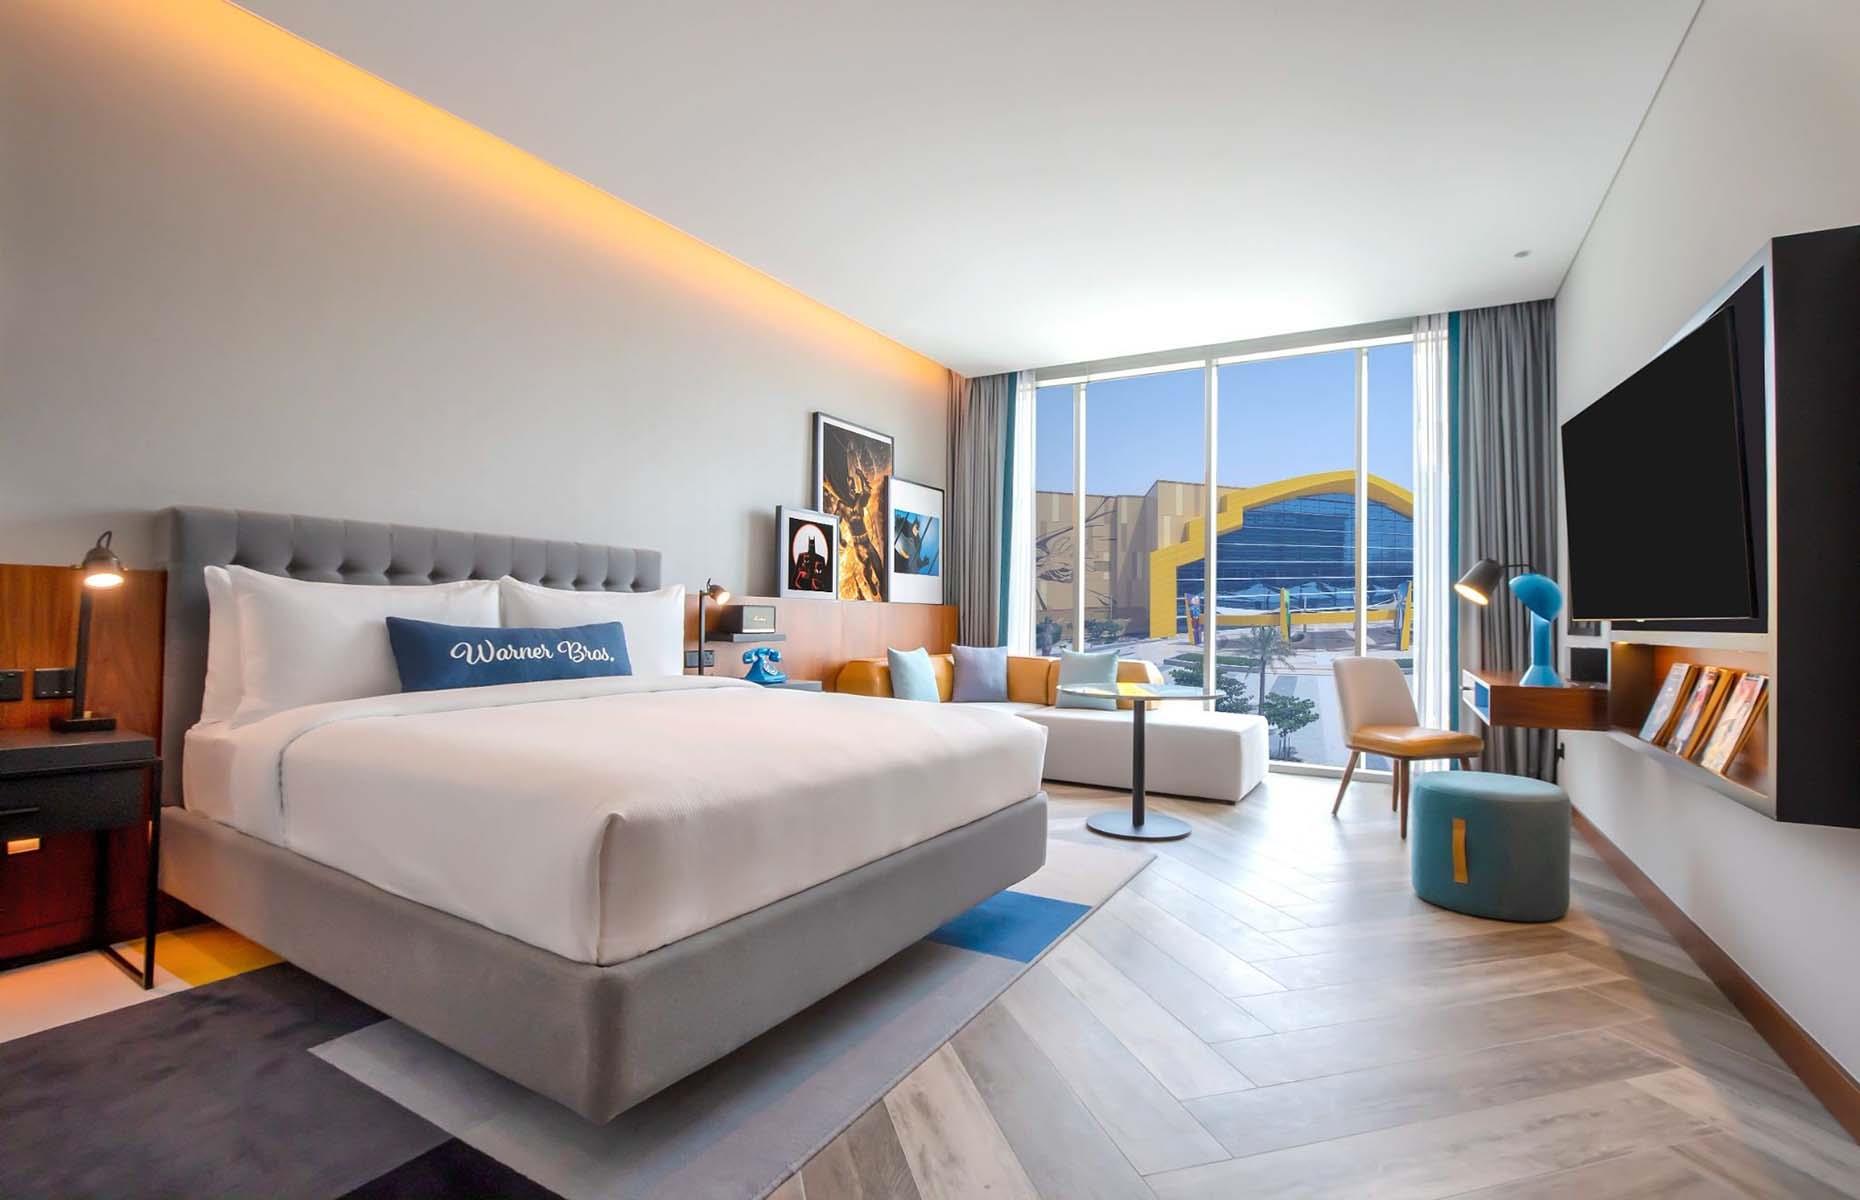 <p>Just opened in Abu Dhabi, <a href="https://www.booking.com/hotel/ae/the-wb-abu-dhabi-curio-collection-by-hilton.en-gb.html" rel="nofollow">the world's first Warner Bros. hotel</a> welcomes its guests with movie and TV props, themed artworks and other memorabilia, but that's not all, folks! Room service is hand-delivered by <em>Looney Tunes</em> characters like Bugs Bunny and Batman fans will be excited to hear the new Batmobile from the upcoming movie <em>The Batman</em> is parked right by the front door. The hotel is part of the Curio Collection by Hilton and is set on Yas Island next to Warner Bros. World Abu Dhabi theme park.</p>  <p><a href="https://www.loveexploring.com/gallerylist/79834/most-unusual-places-to-stay-in-the-world"><strong>Now discover to most unusual places to stay around the world</strong></a></p>